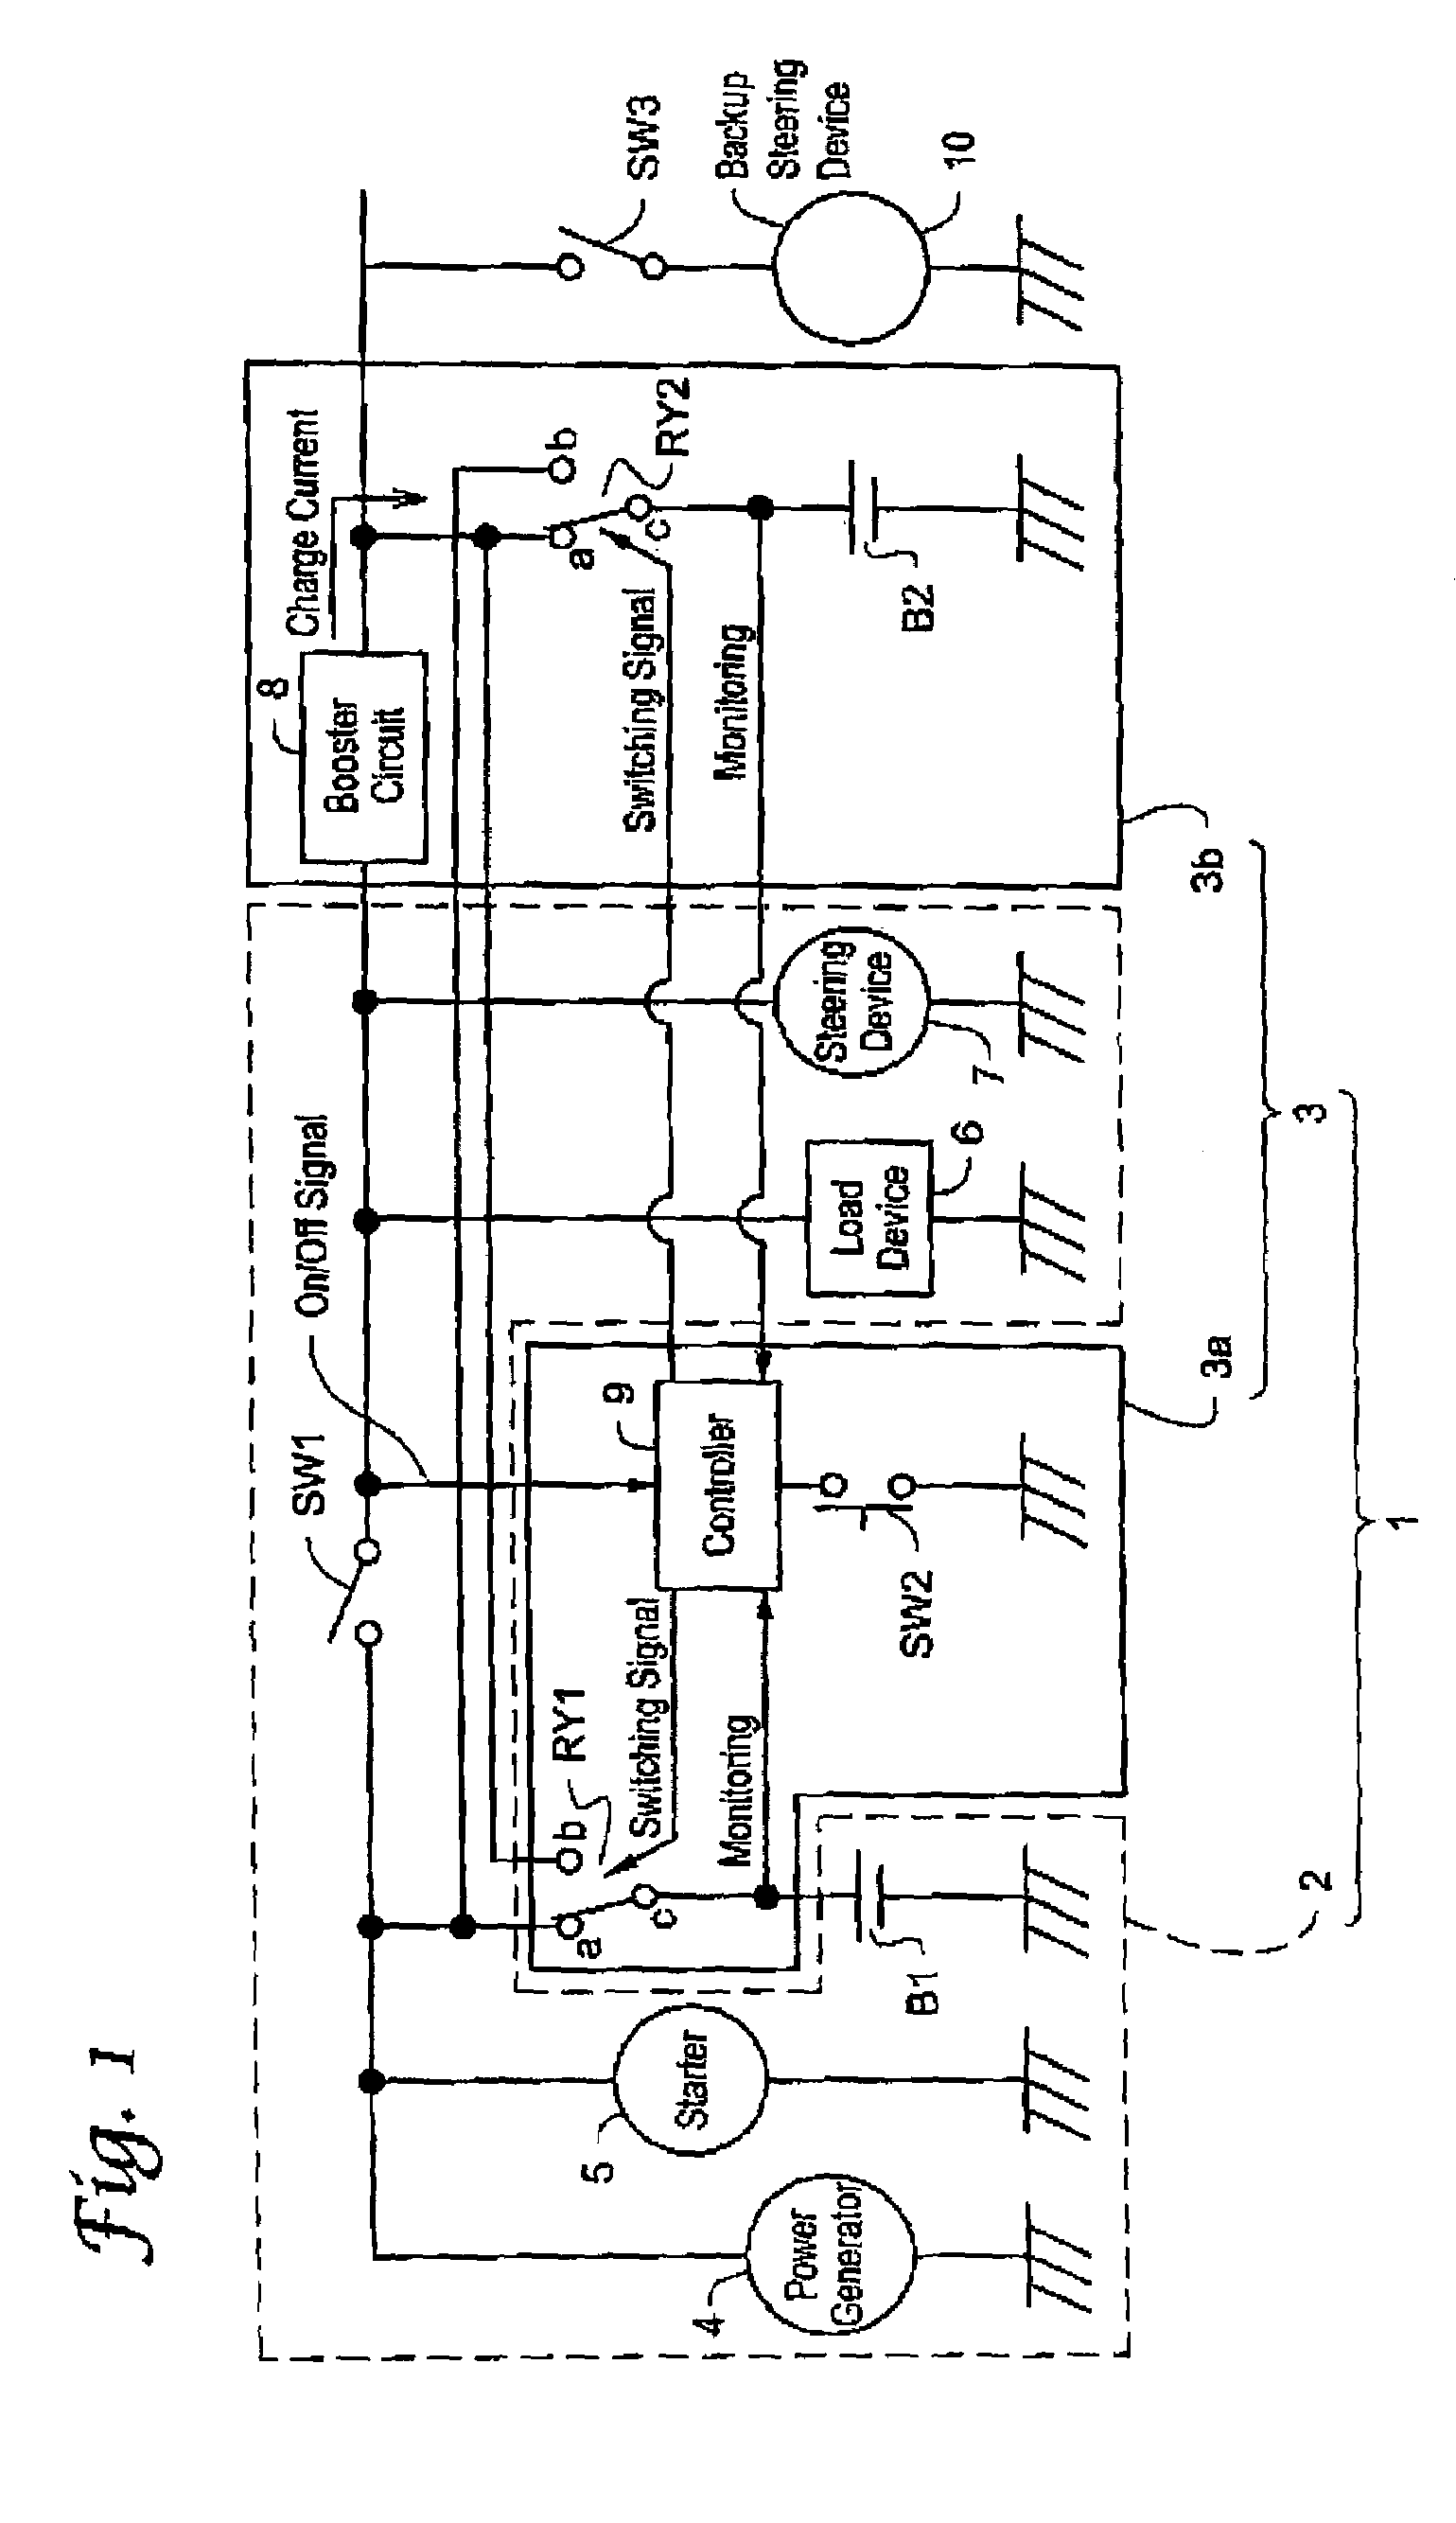 Apparatus for supplying power for a vehicle